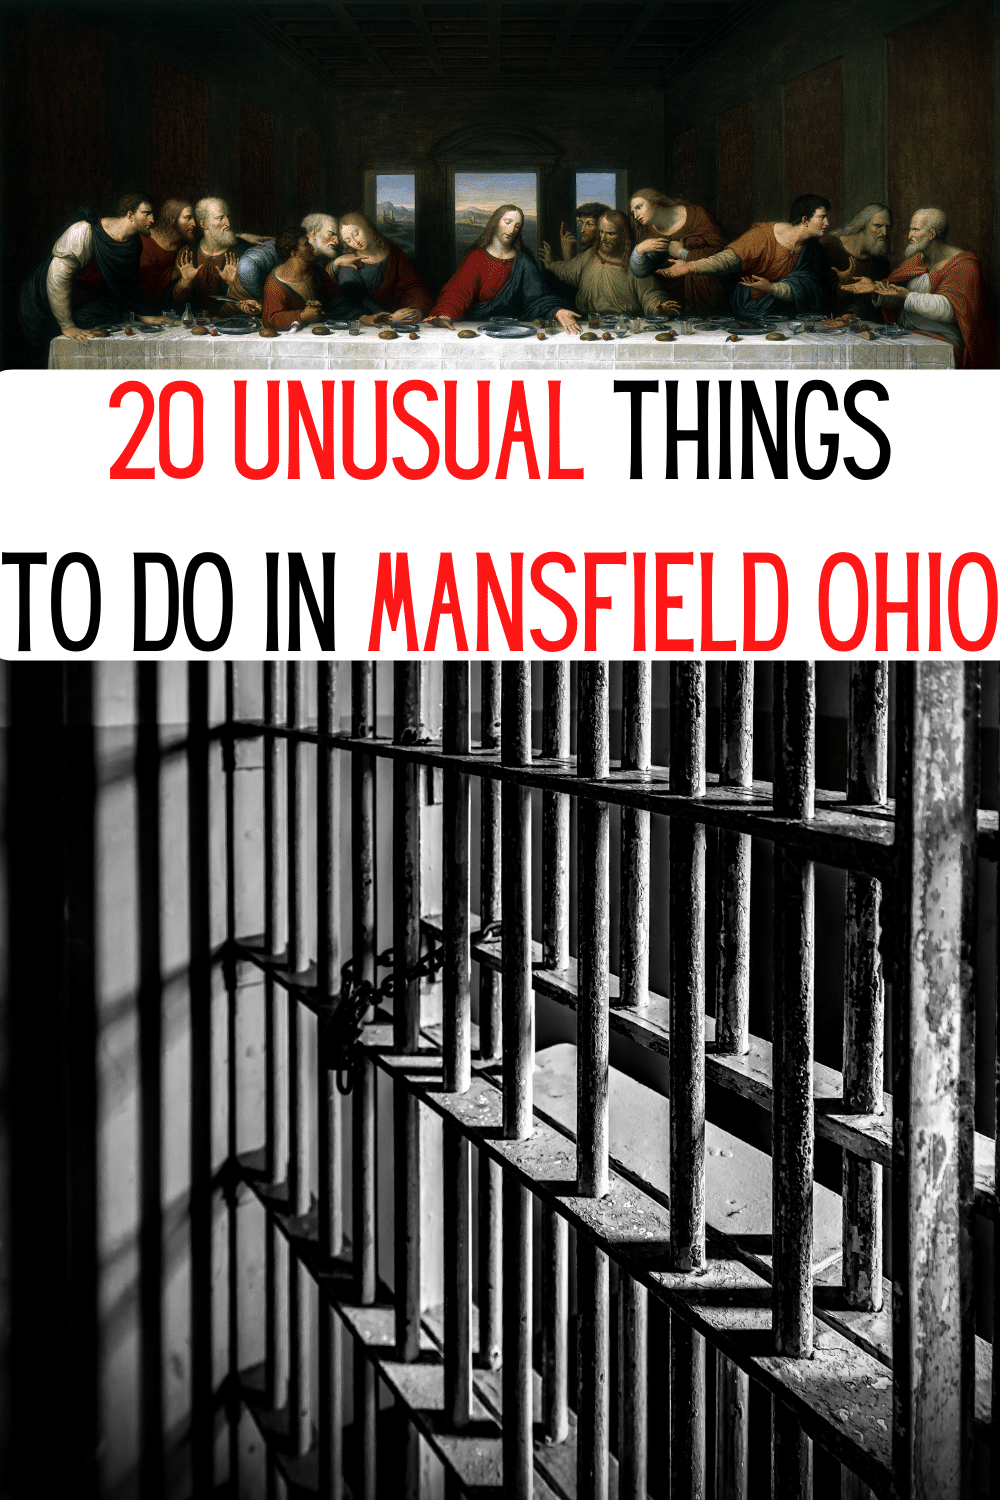 two picture collage, the top pic is of the "last supper" from the bible, bottom picture is jail cell bars. Text days: 20 unusual things to do in mansfield Ohio